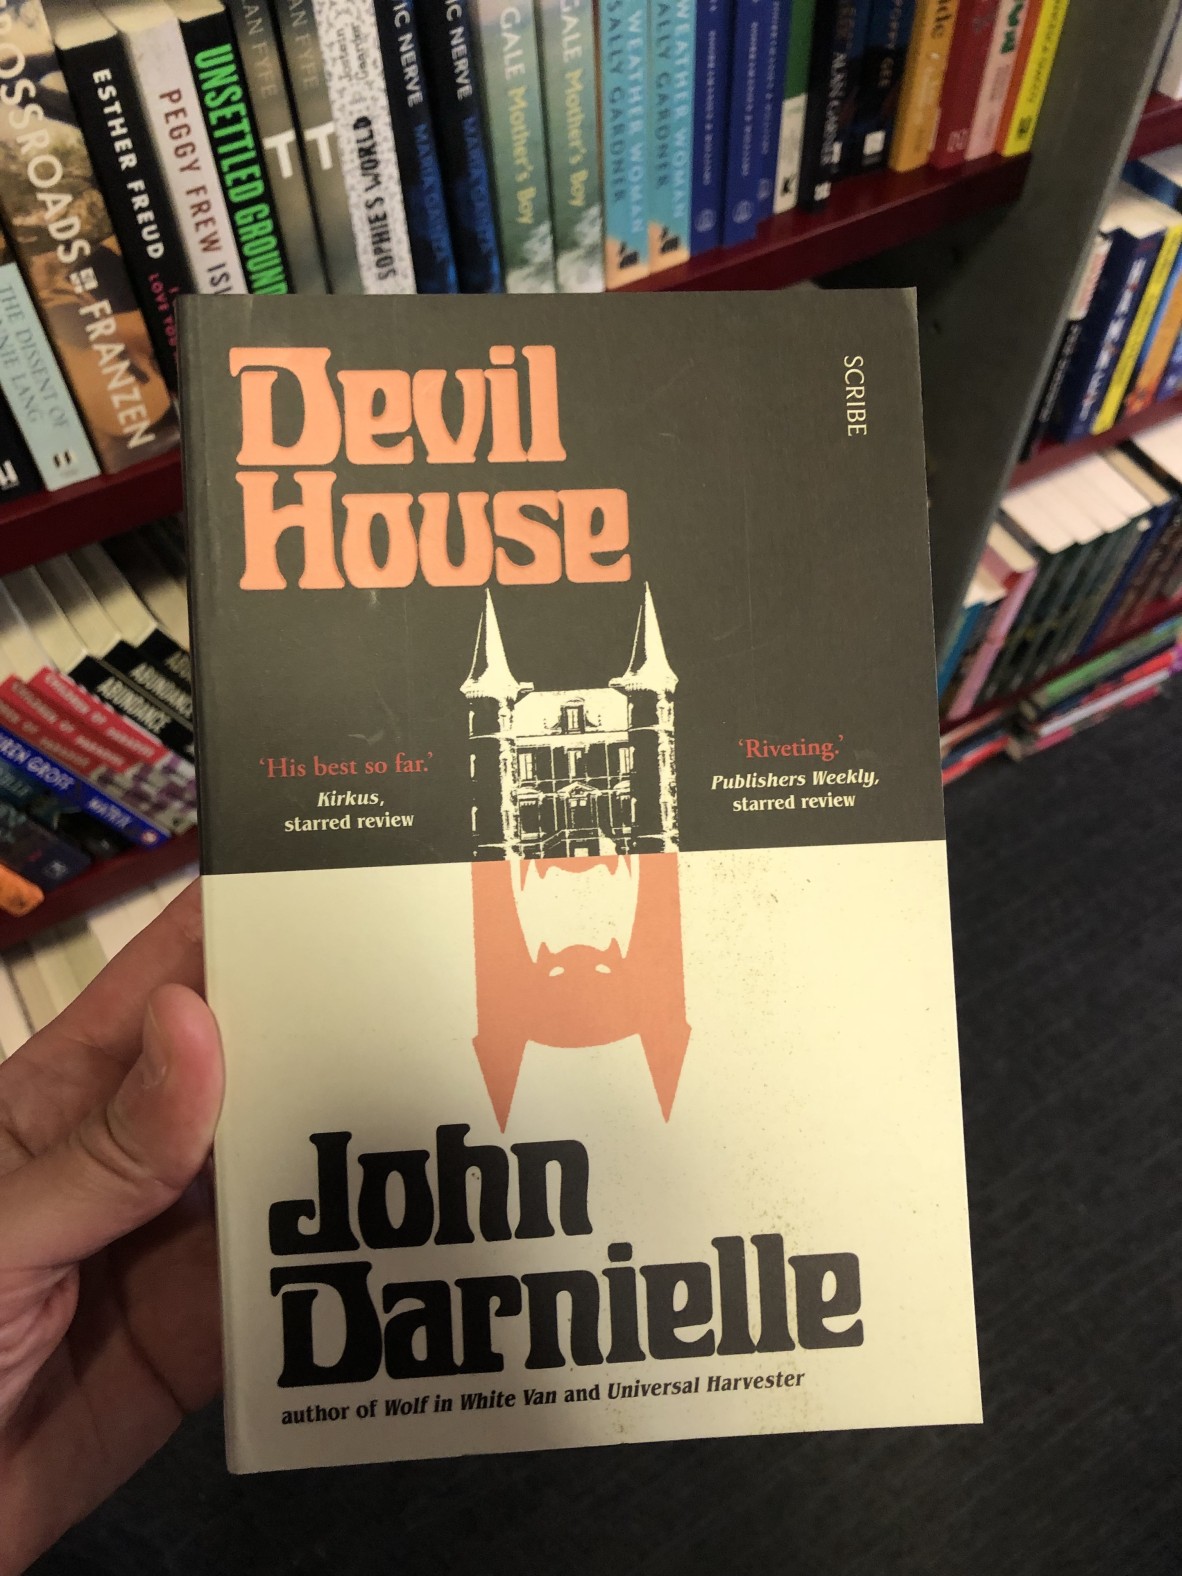 A hand is holding a copy of the book Devil House by John Darnielle In the background are bookshelves